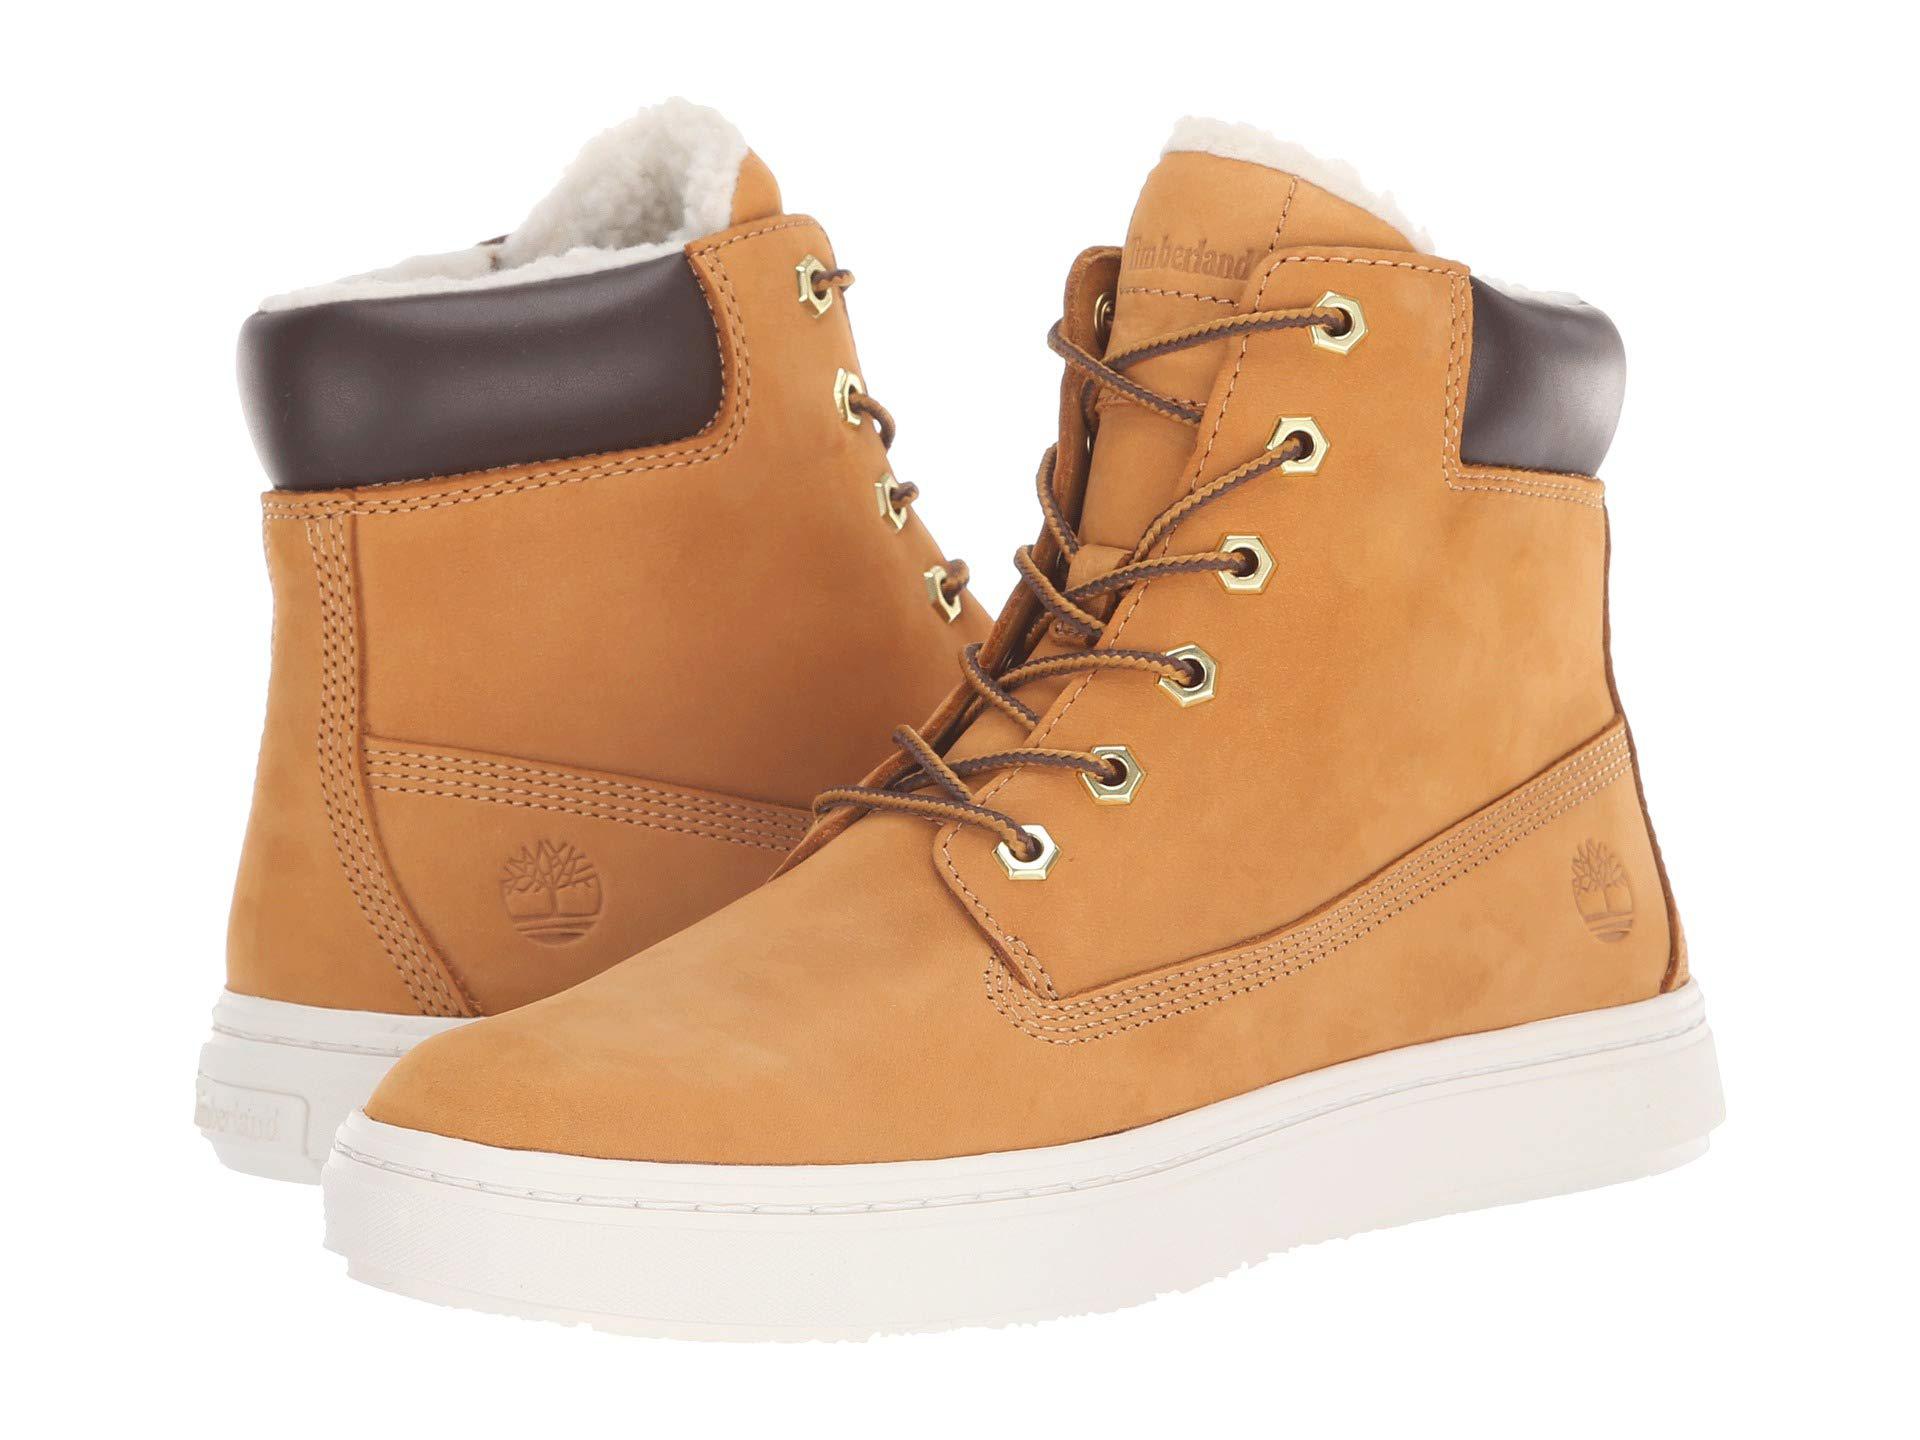 Timberland londyn 6 inch boots dicks